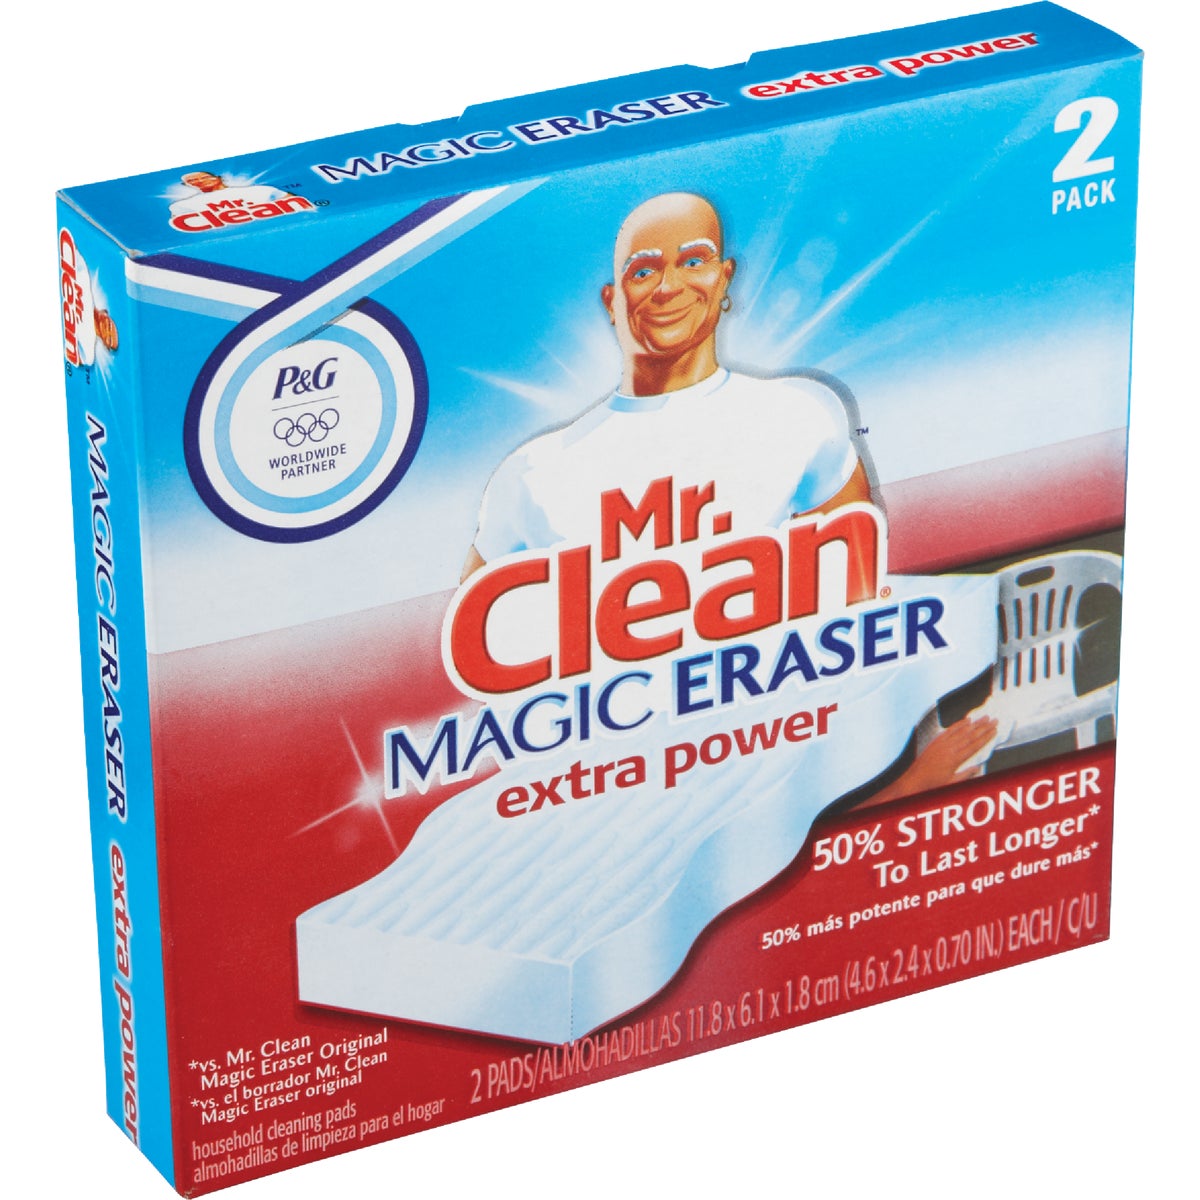 Item 600594, 50% stronger for heavy-duty cleaning.